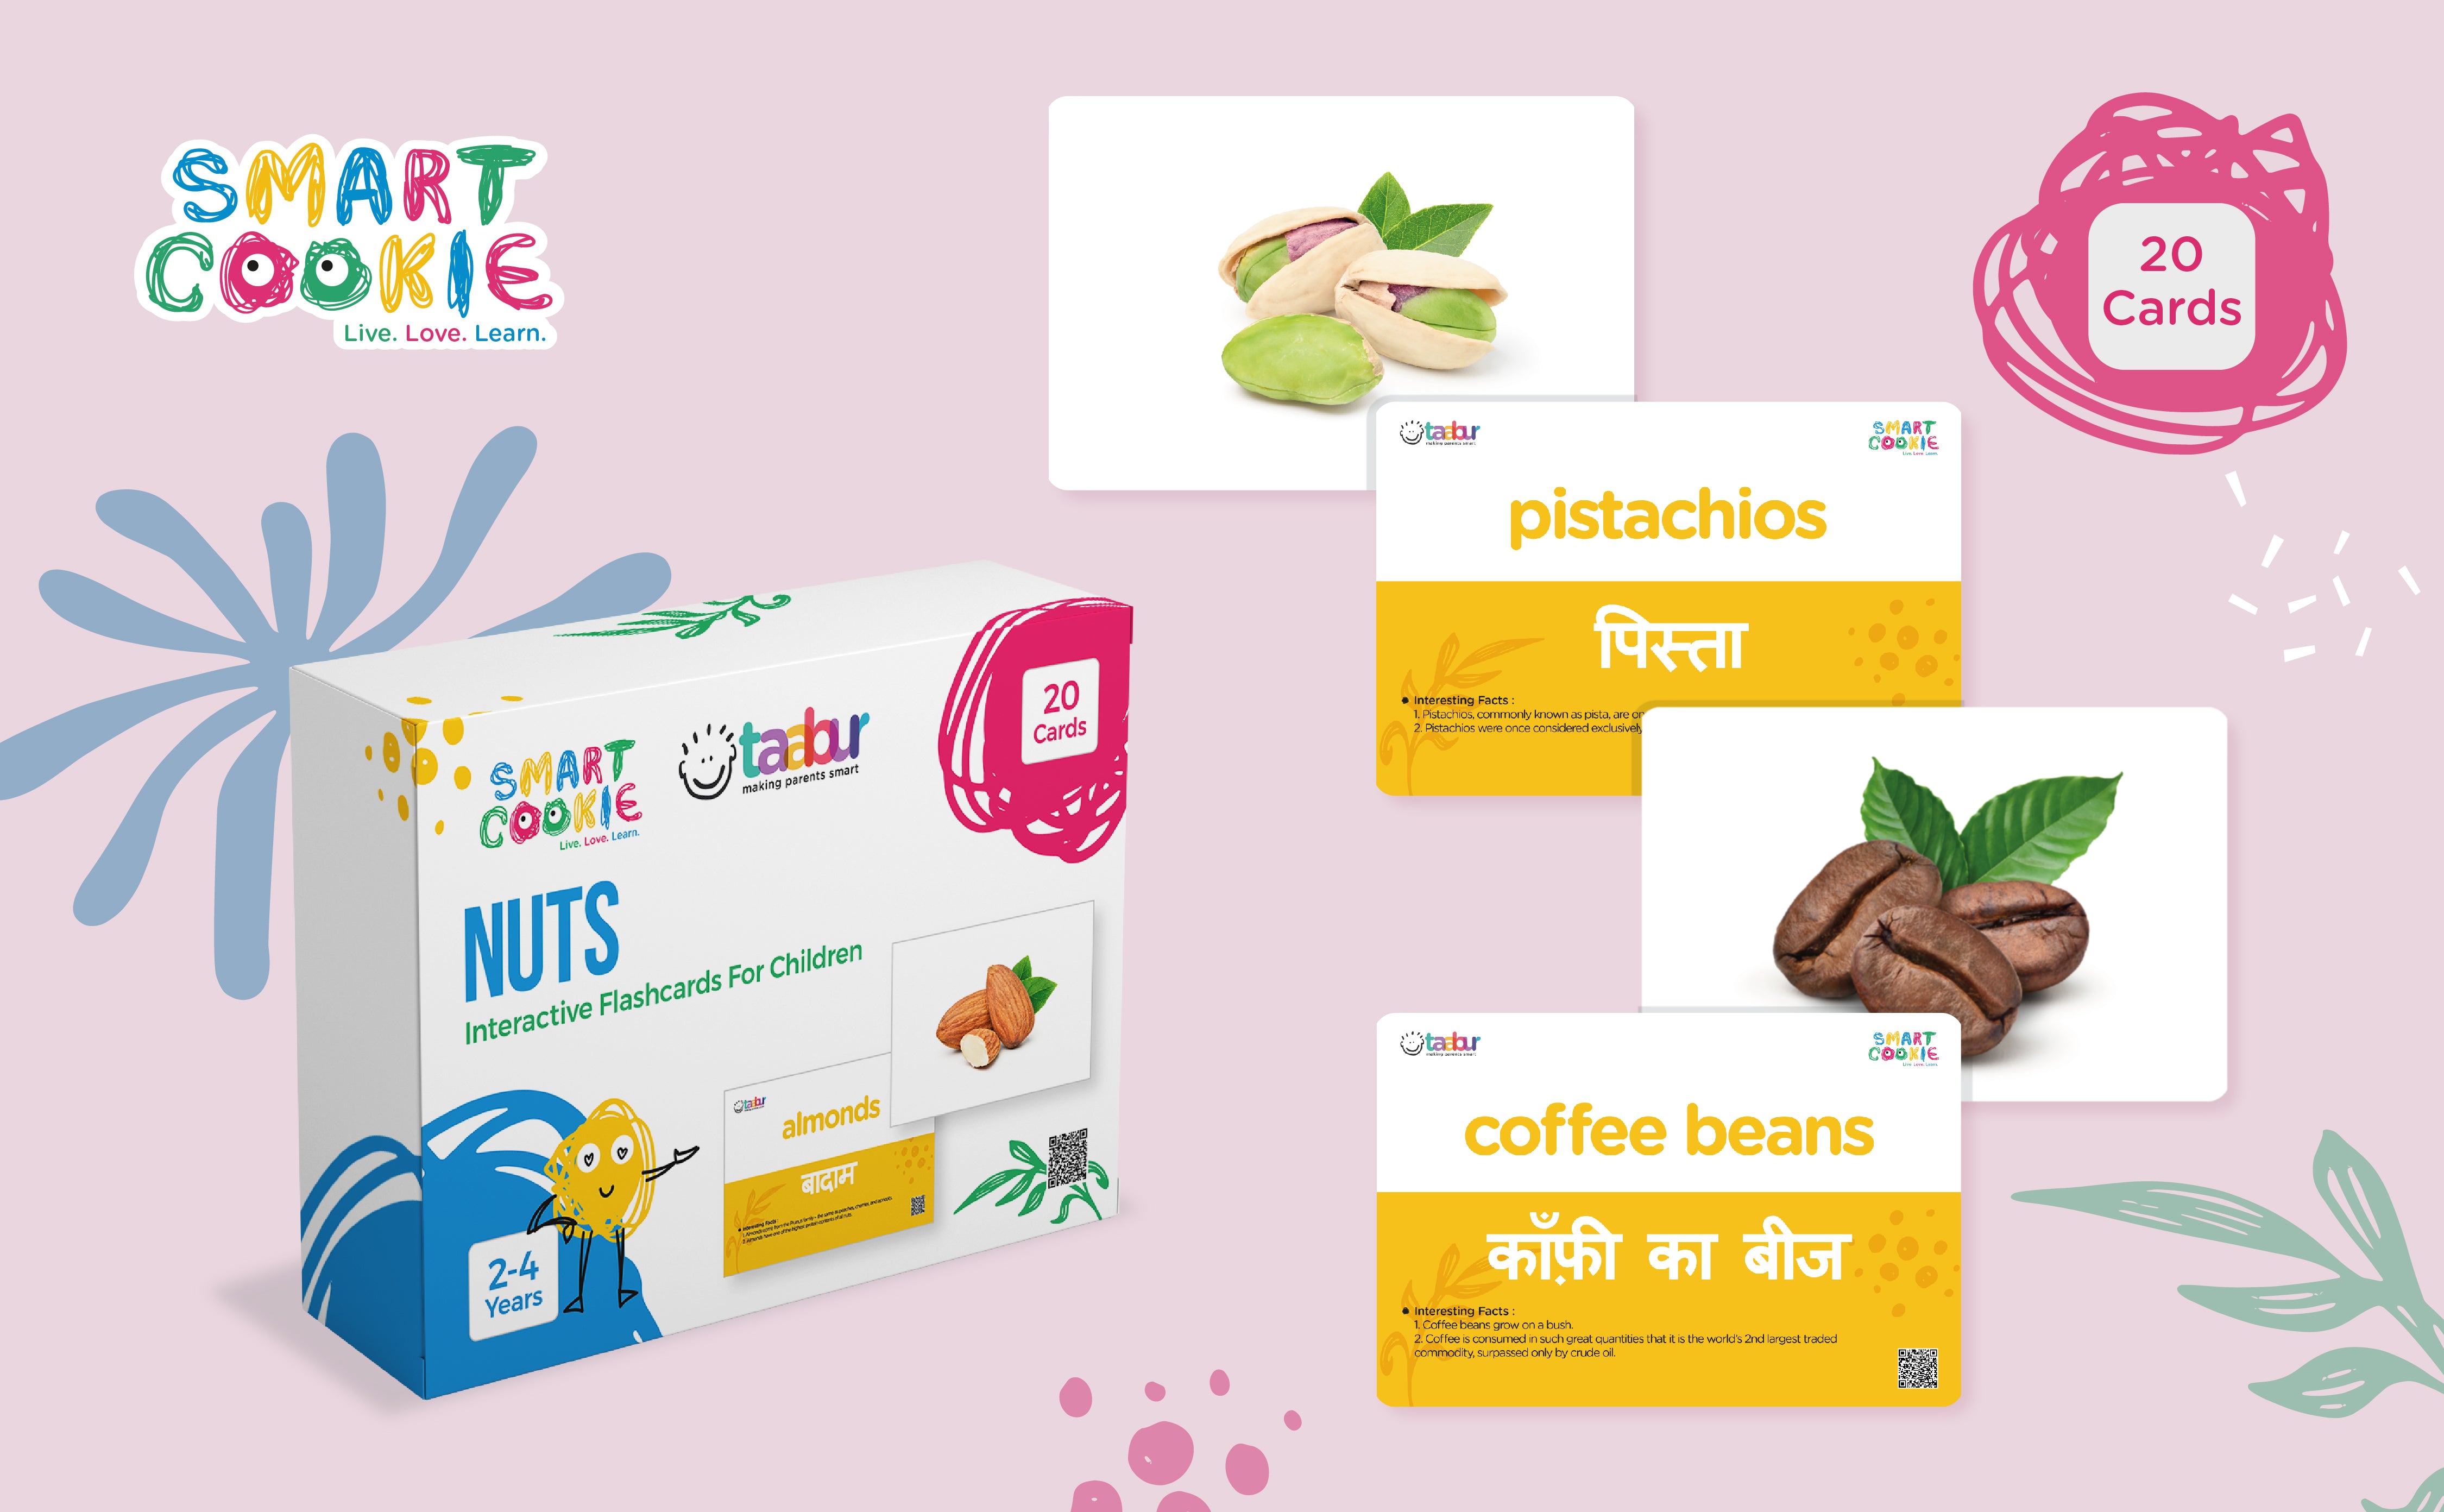 Nuts - Interactive Flash Cards for Children (20 Cards) - for Kids Aged 2 to 4 Years Old